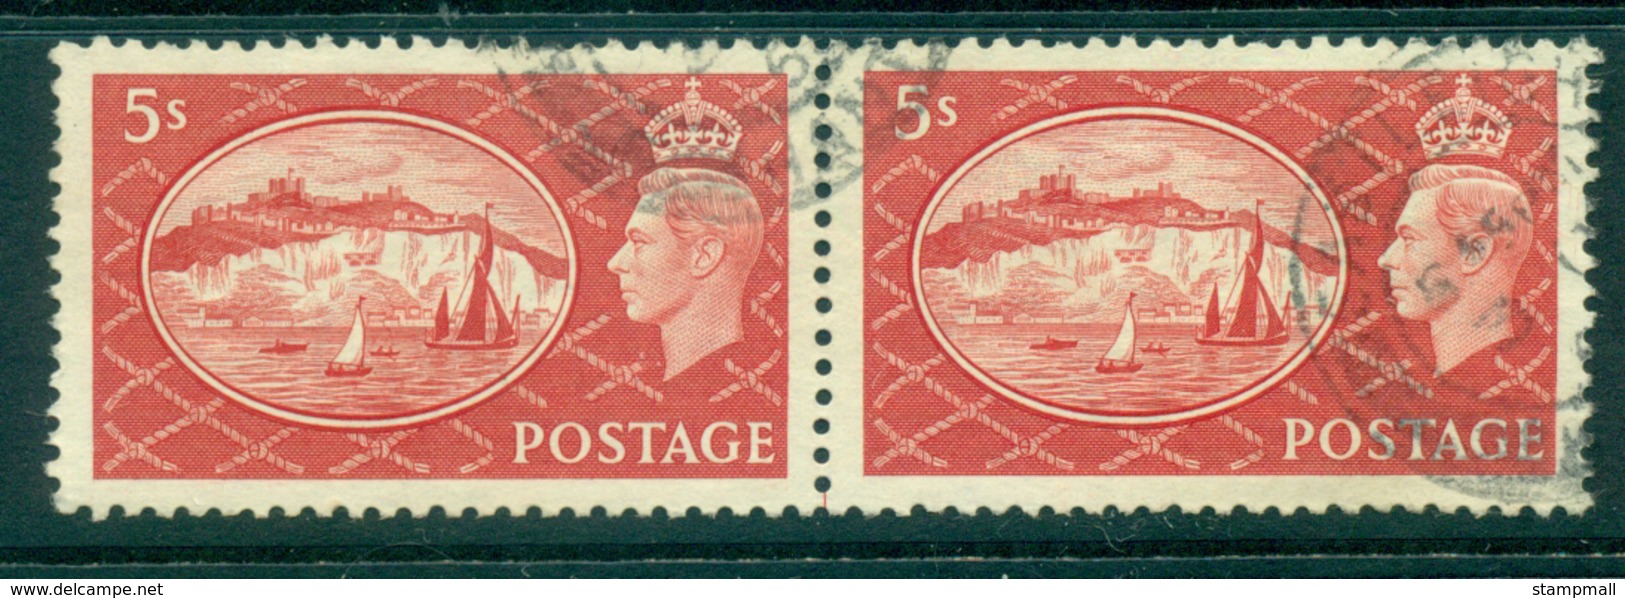 GB 1951 High Values 5/- Pair FU Lot32717 - Unclassified